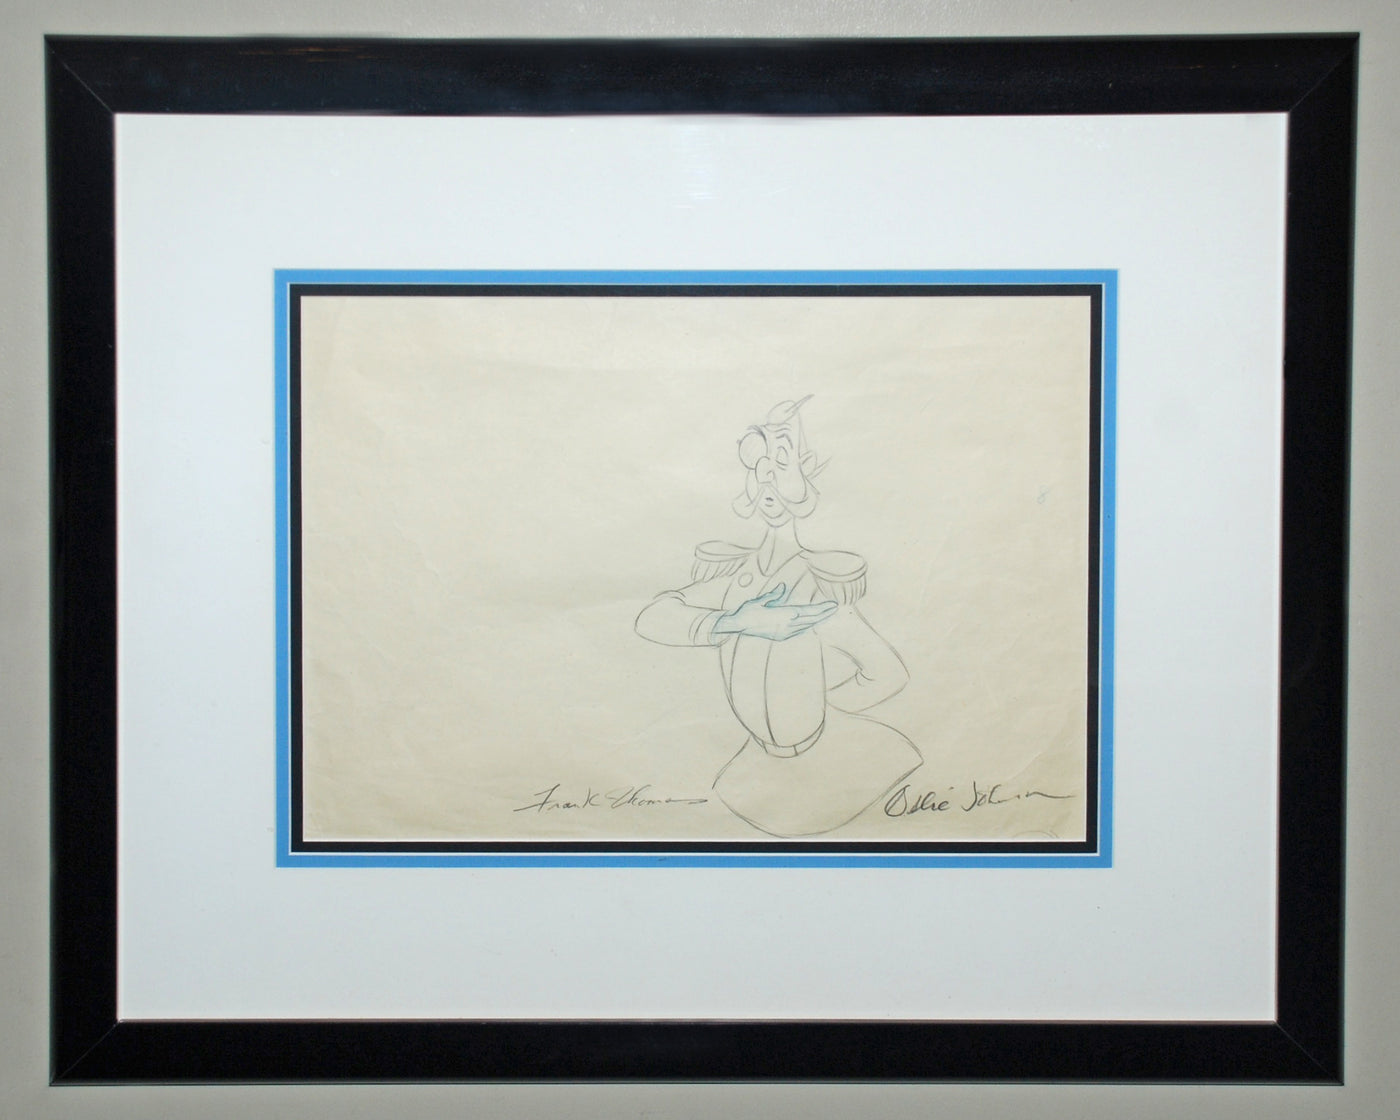 Original Walt Disney Production Drawing from Cinderella featuring the Grand Duke signed by Frank Thomas and Ollie Johnston